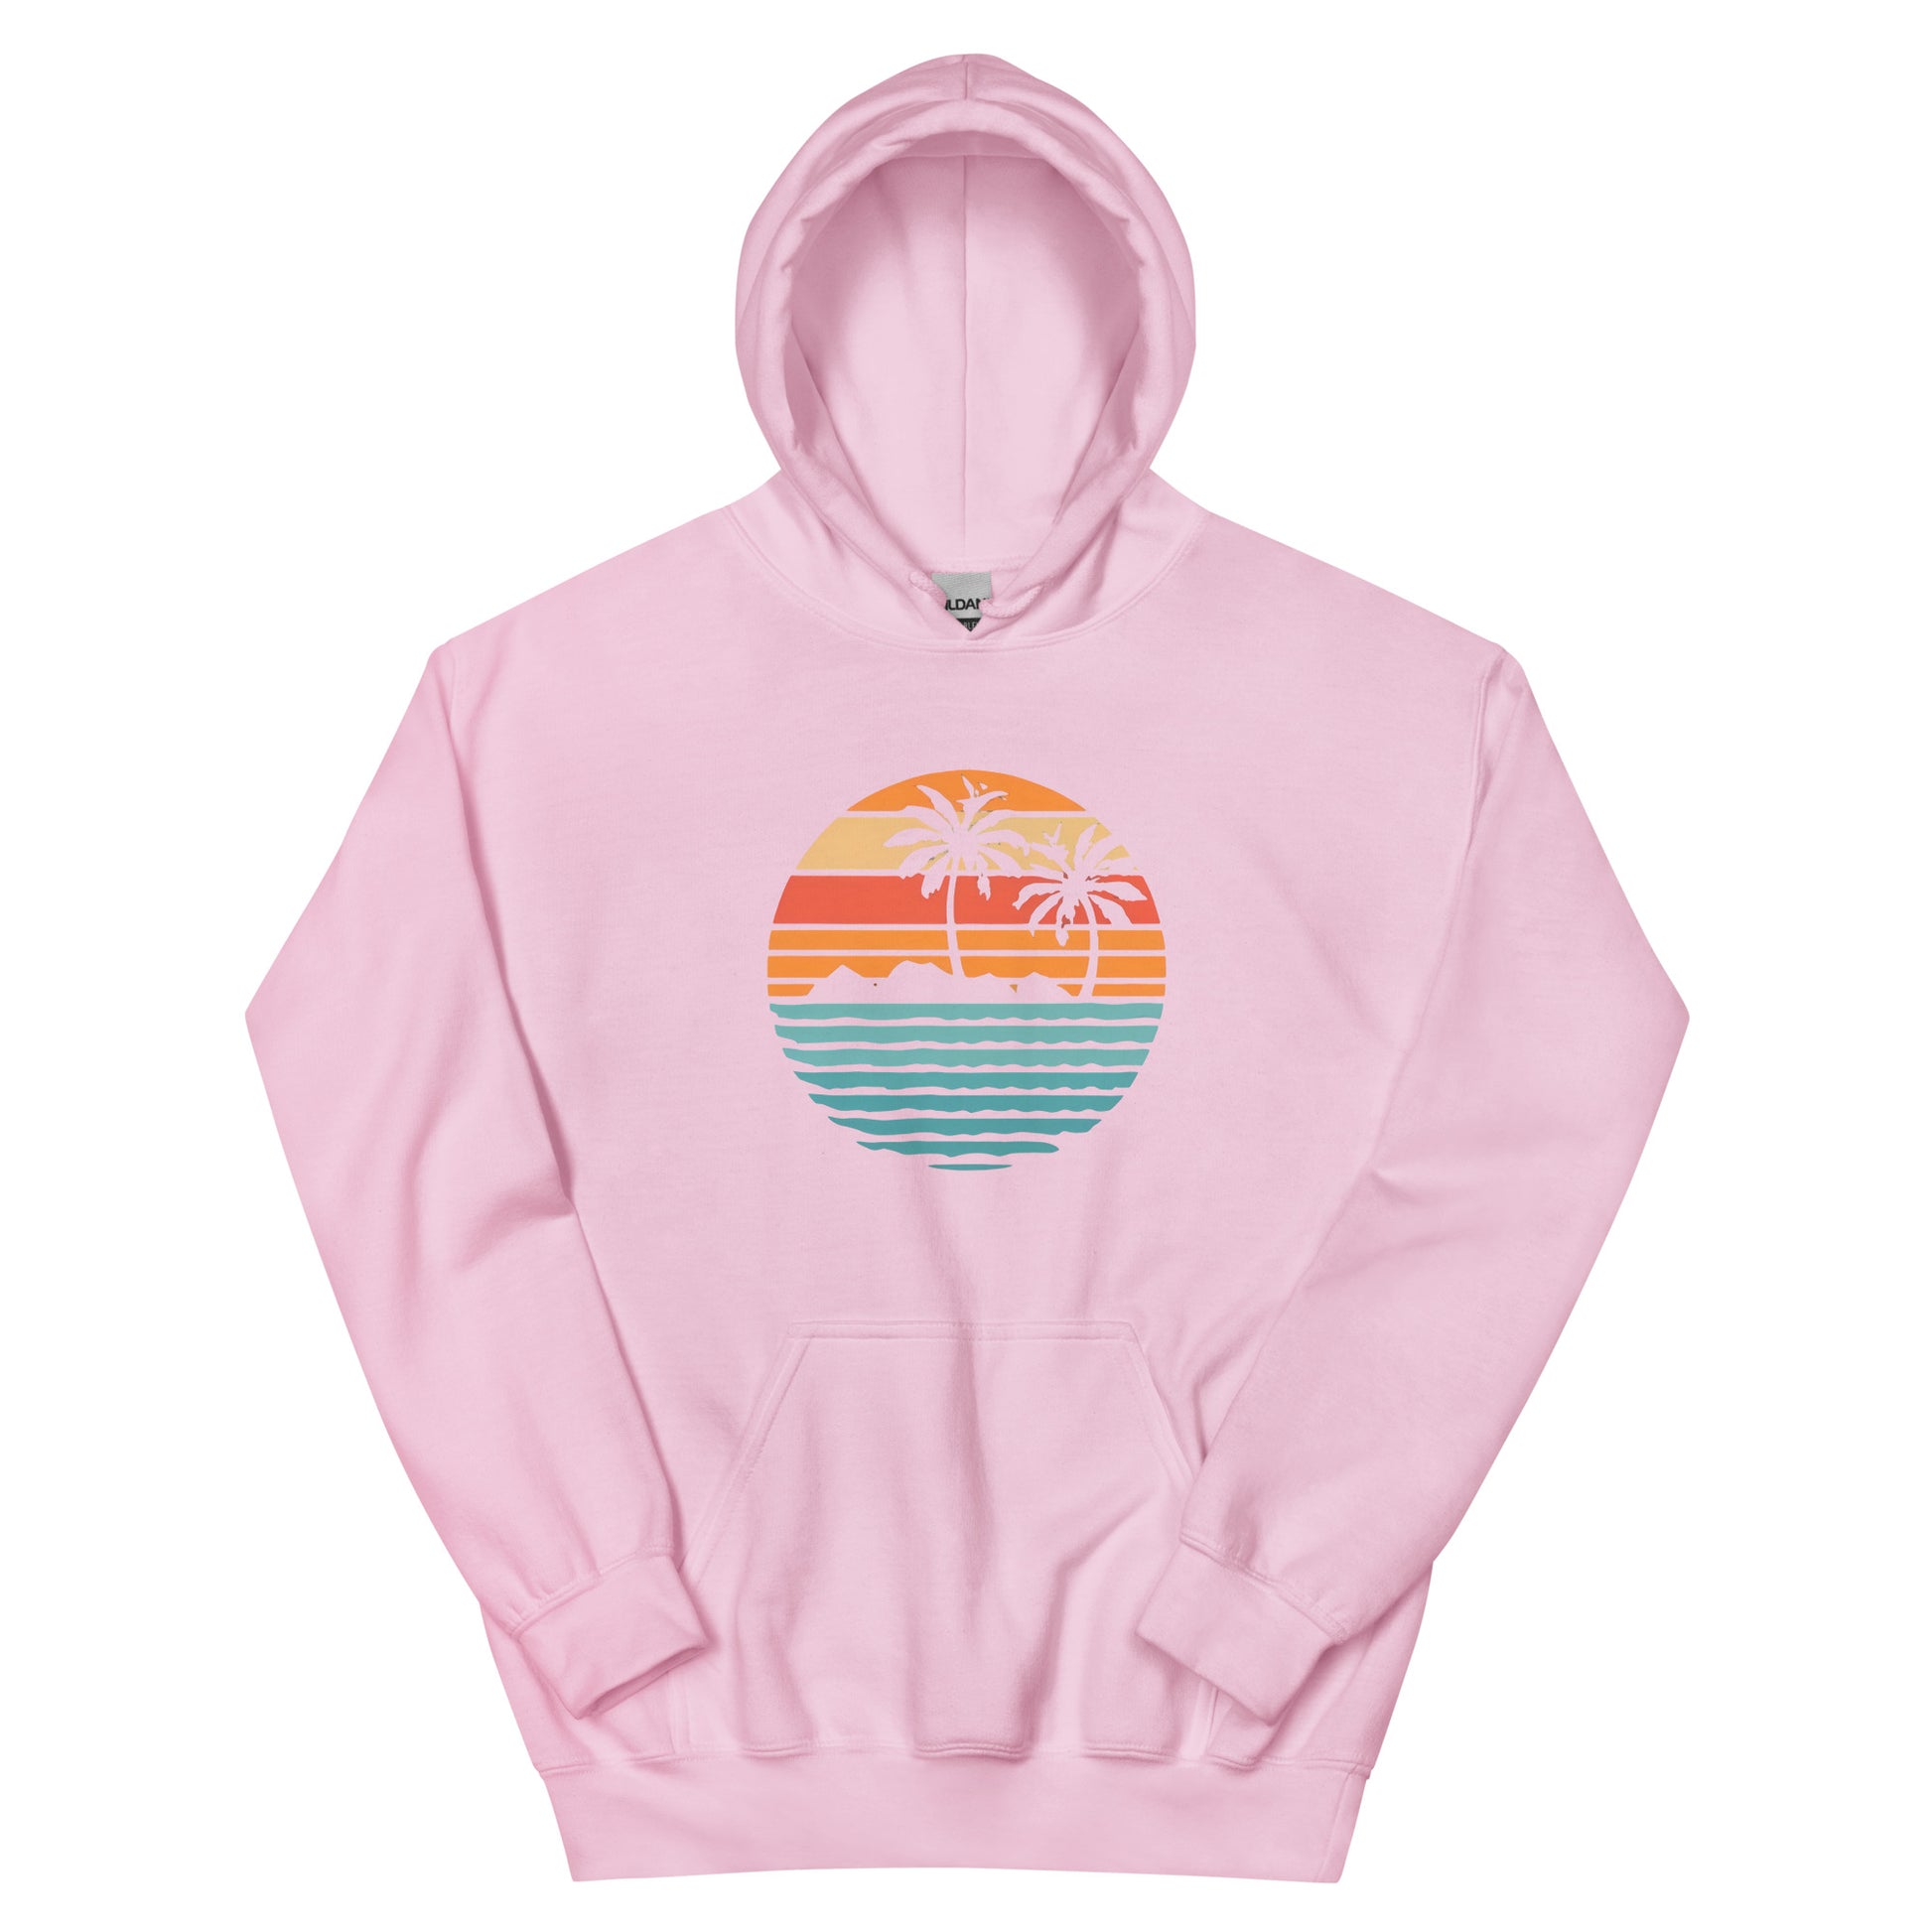 Pink Hoodie and a print of retro island